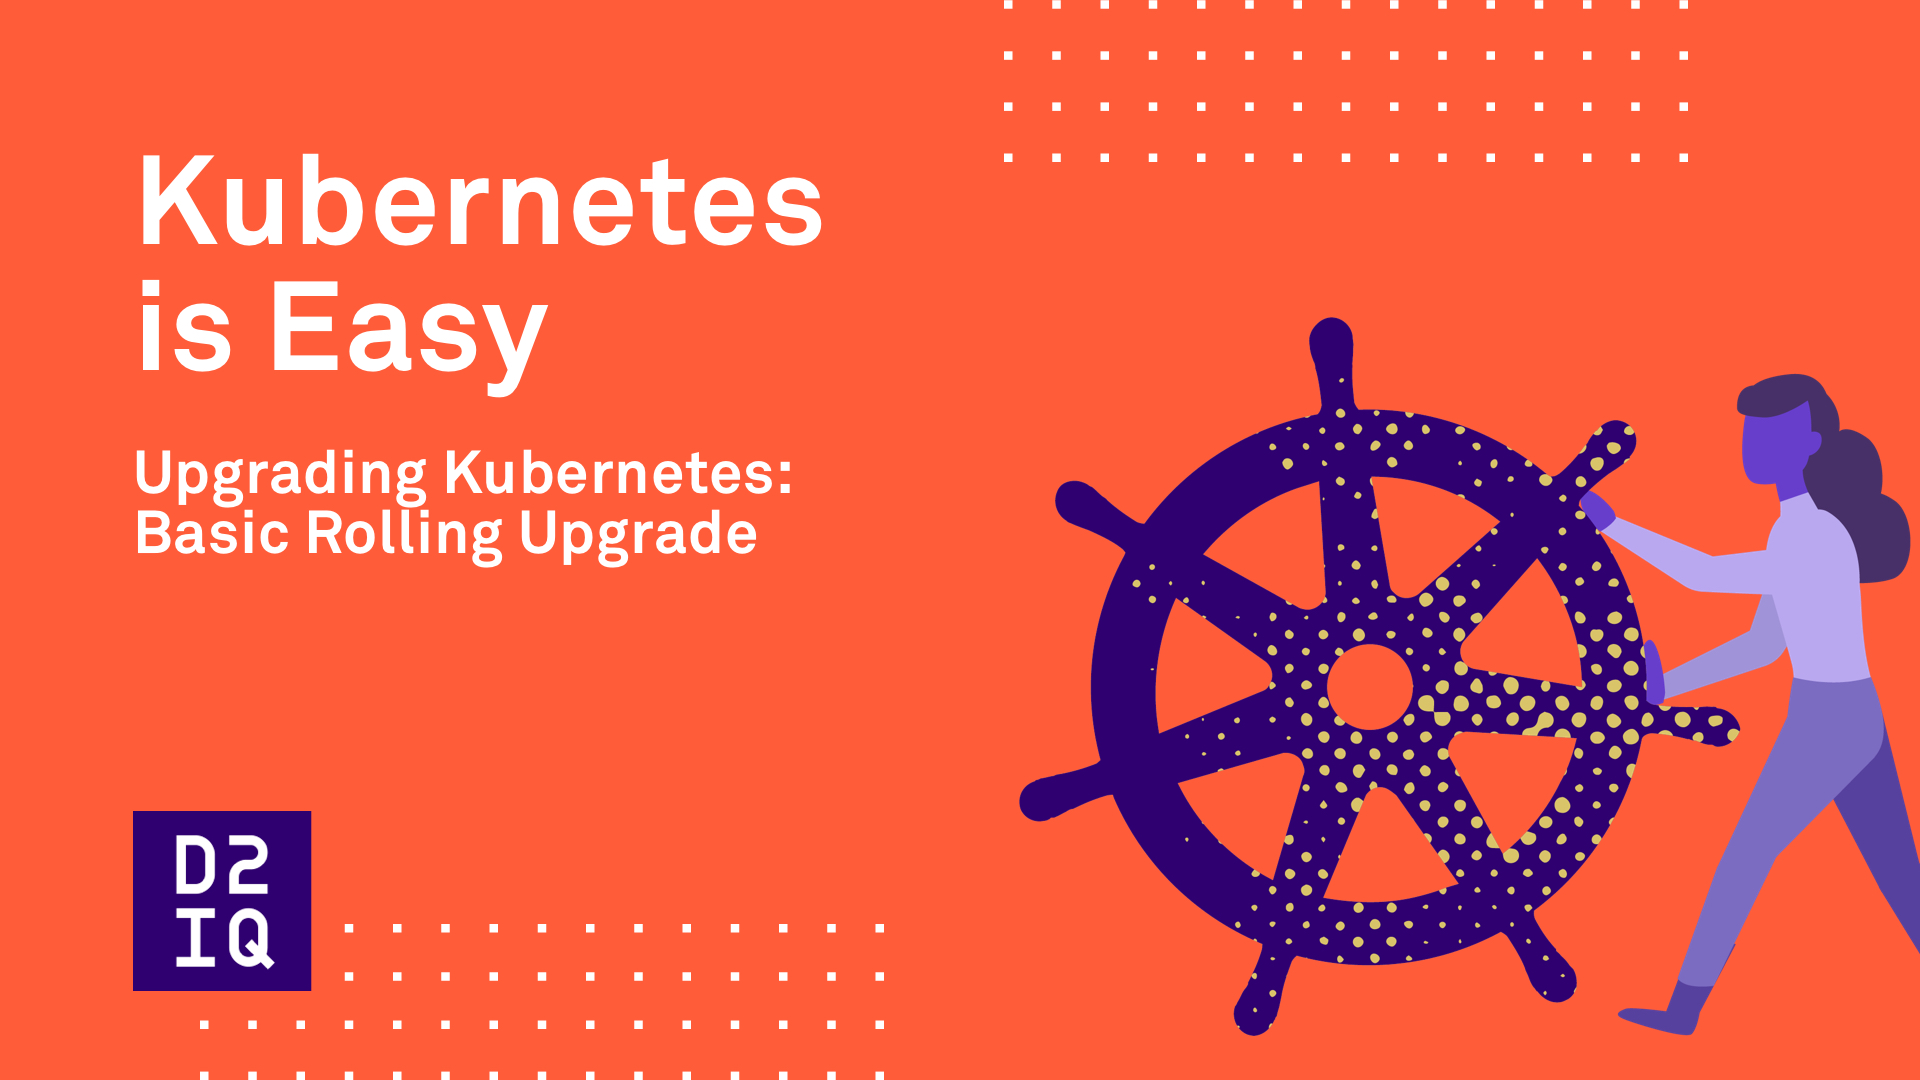 How to Perform a Basic Rolling Upgrade of a Kubernetes Cluster